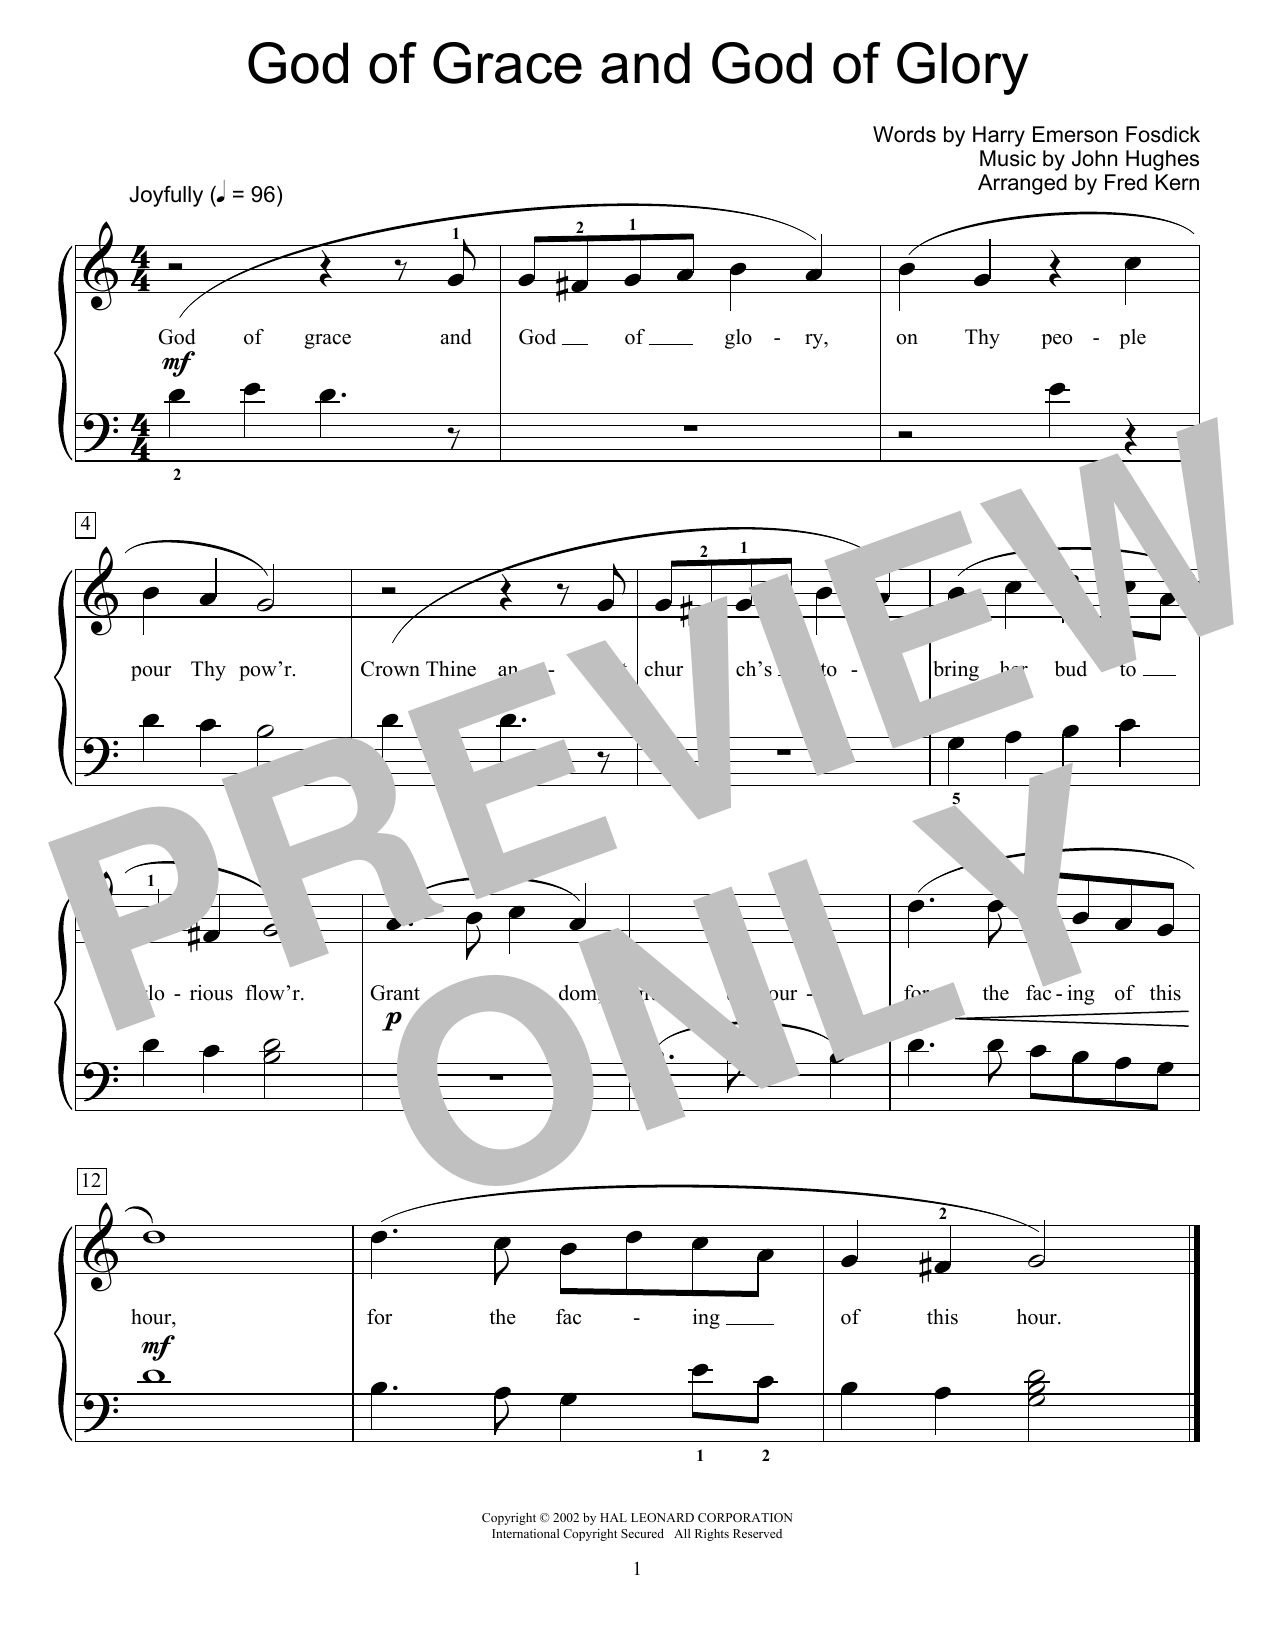 Harry Emerson Fosdick God Of Grace And God Of Glory (arr. Fred Kern) sheet music notes and chords. Download Printable PDF.